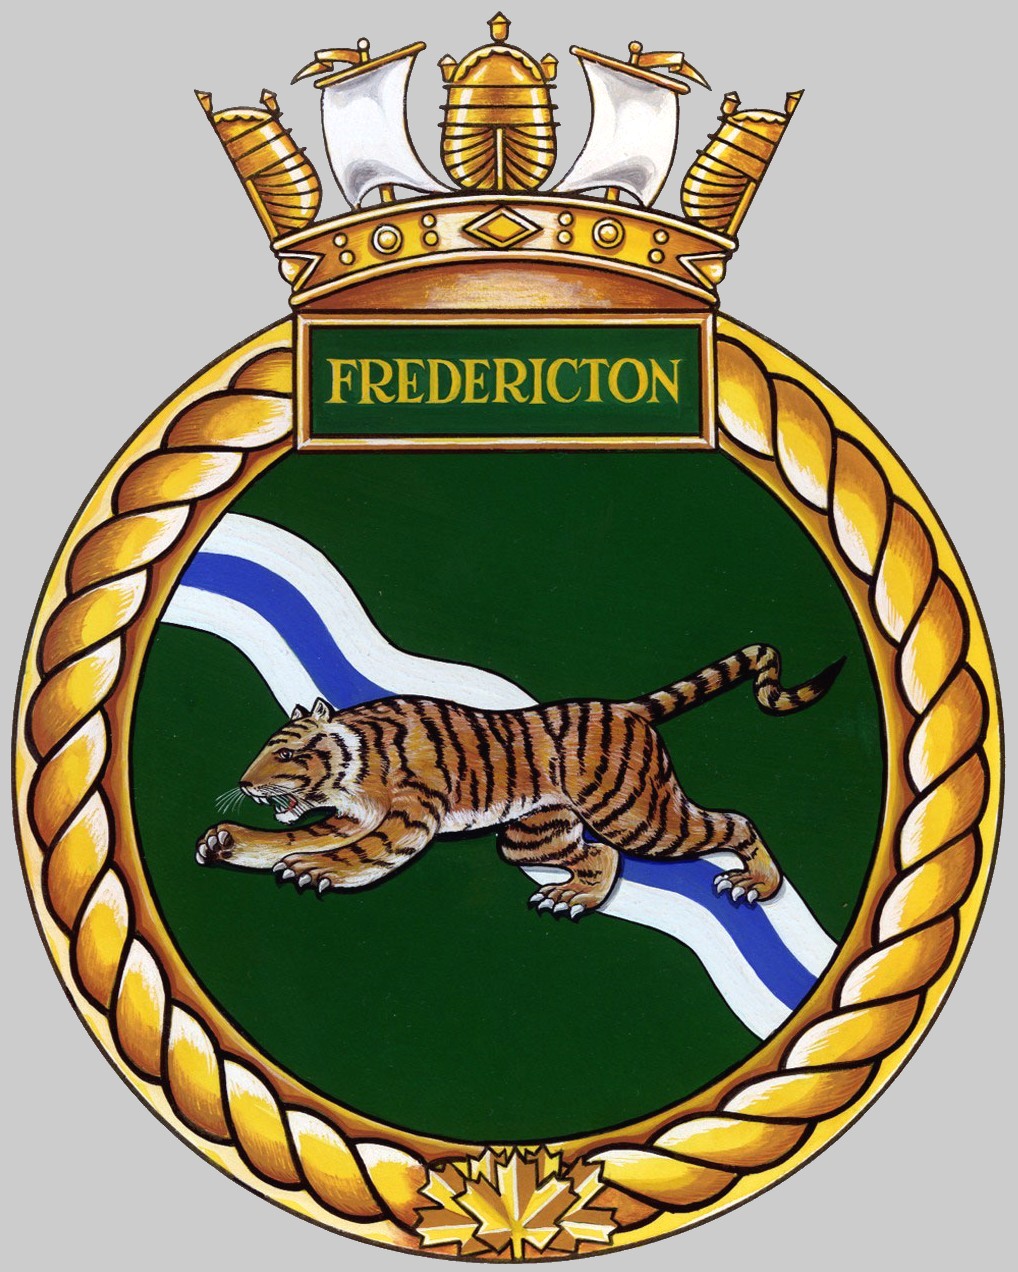 ffh-337 hmcs fredericton crest insignia patch badge halifax class helicopter patrol frigate ncsm royal canadian navy 02x